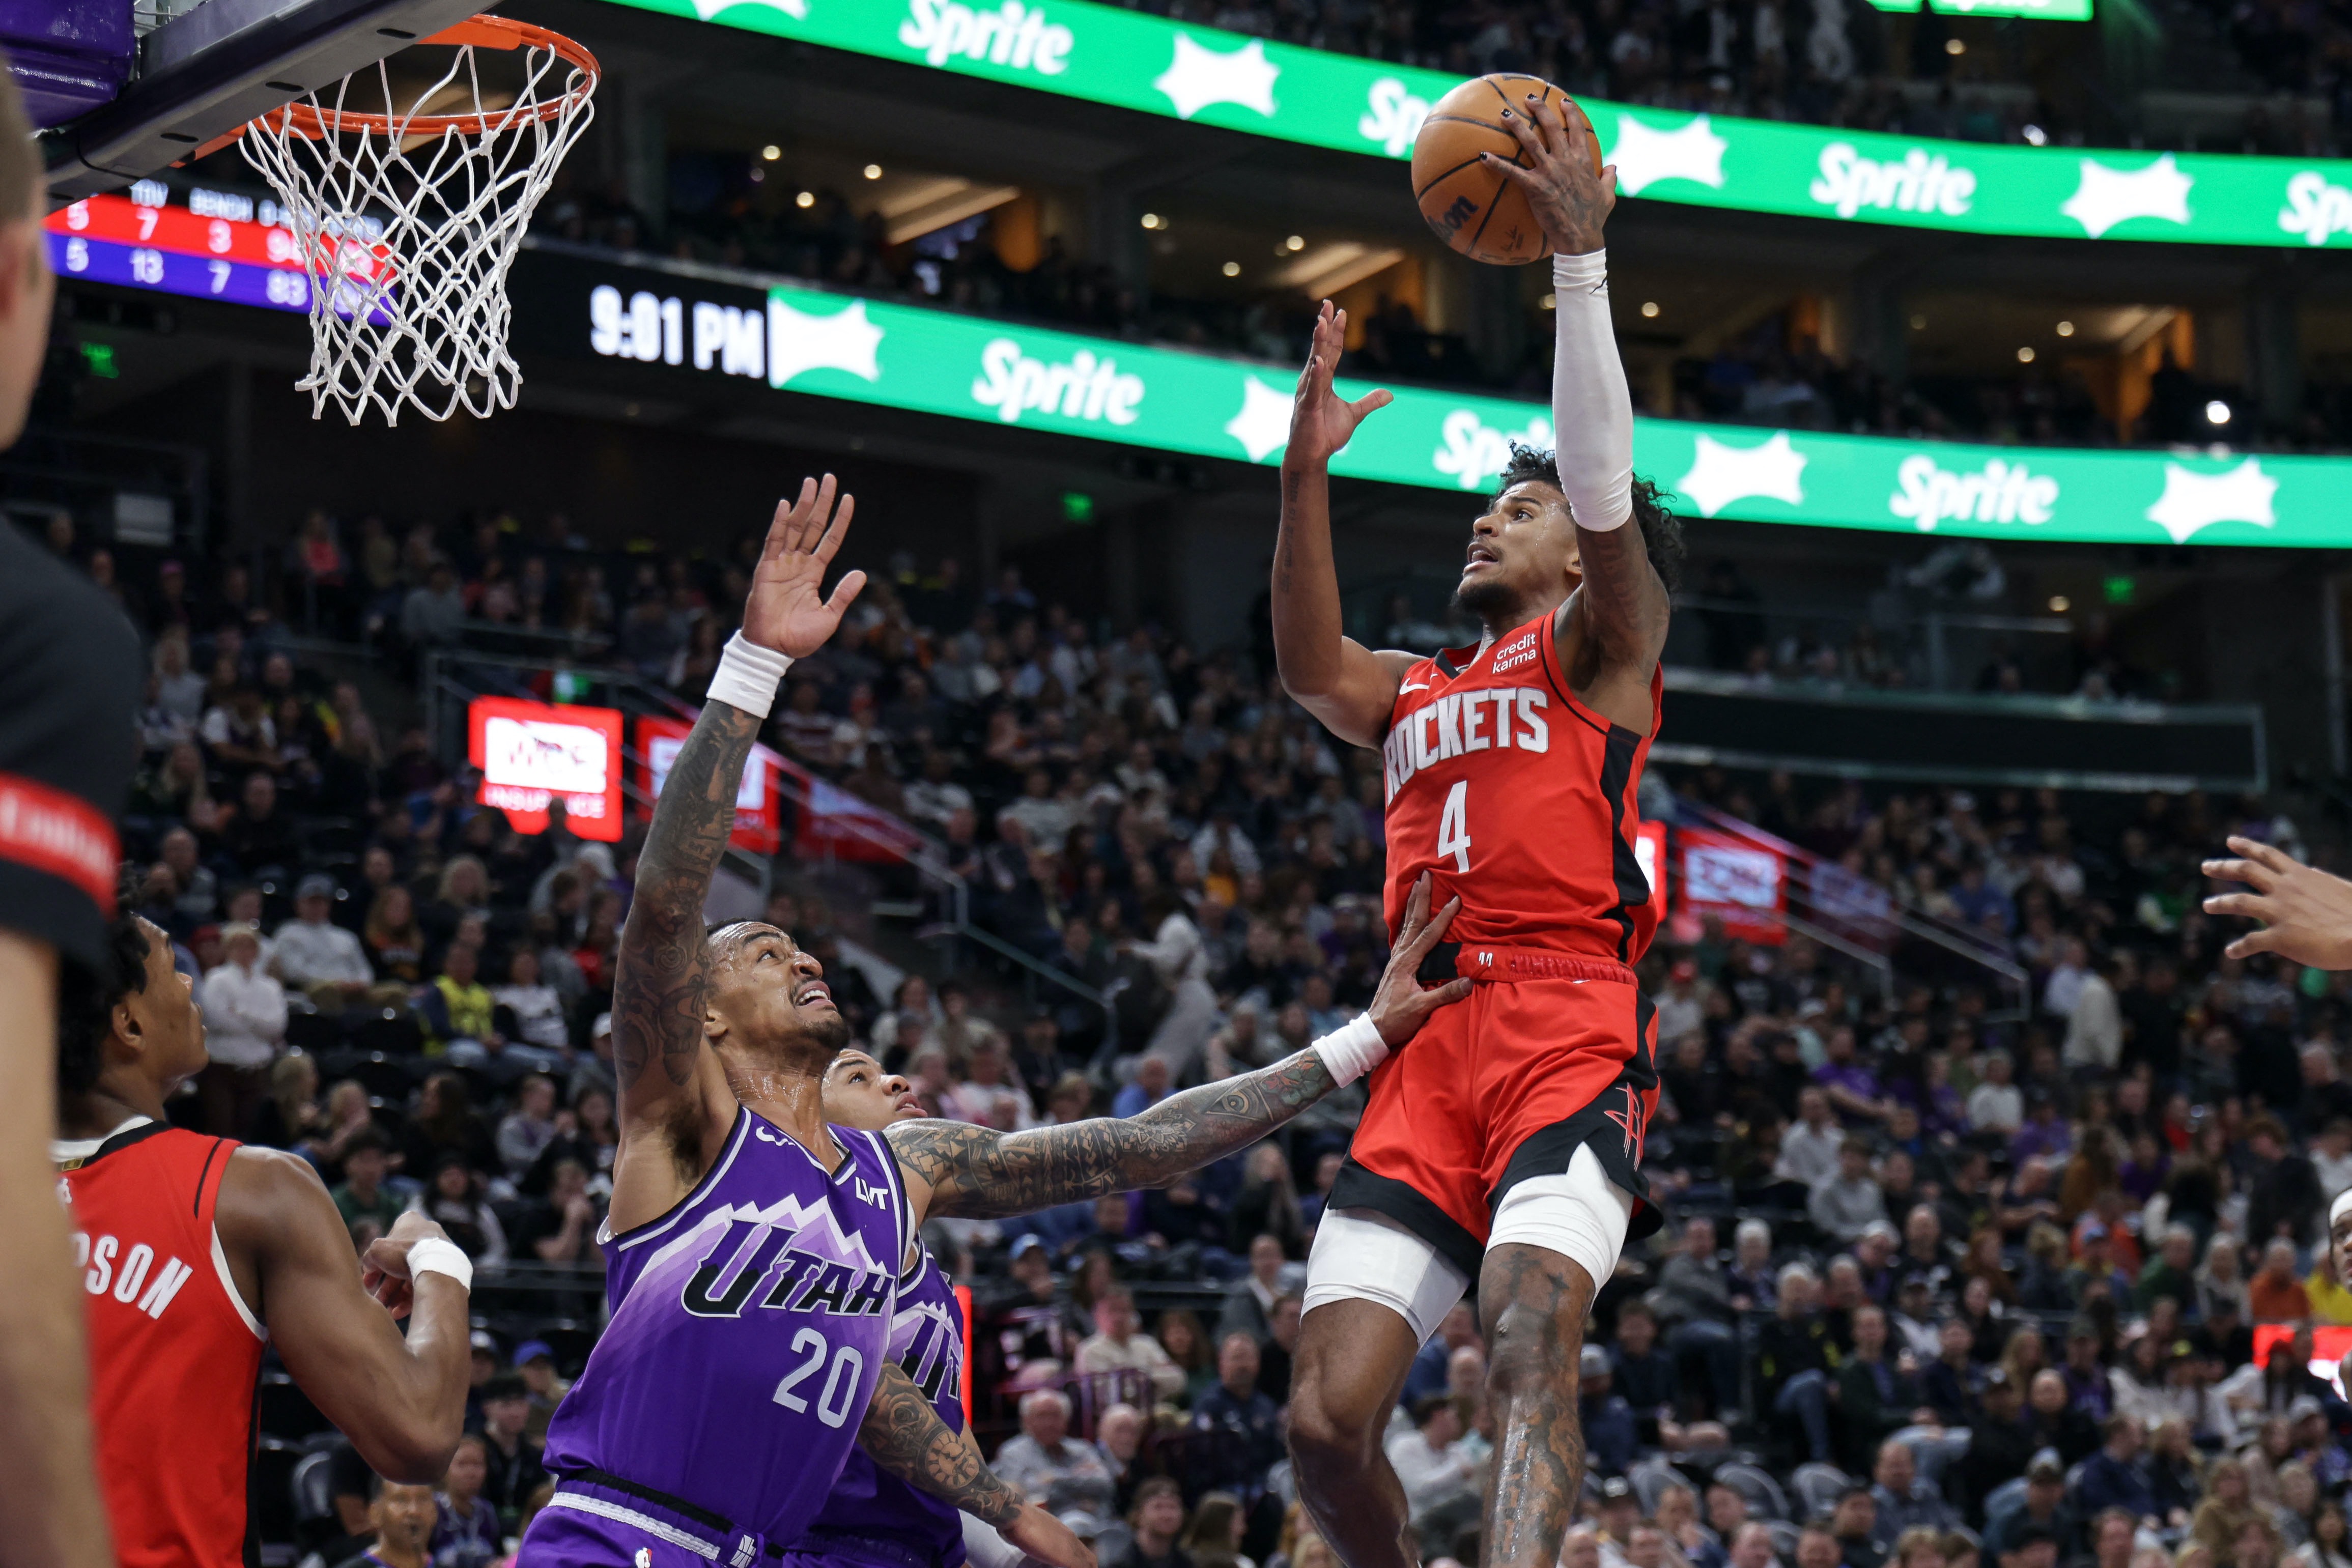 NBA: Rockets hold off Jazz for 11th straight win